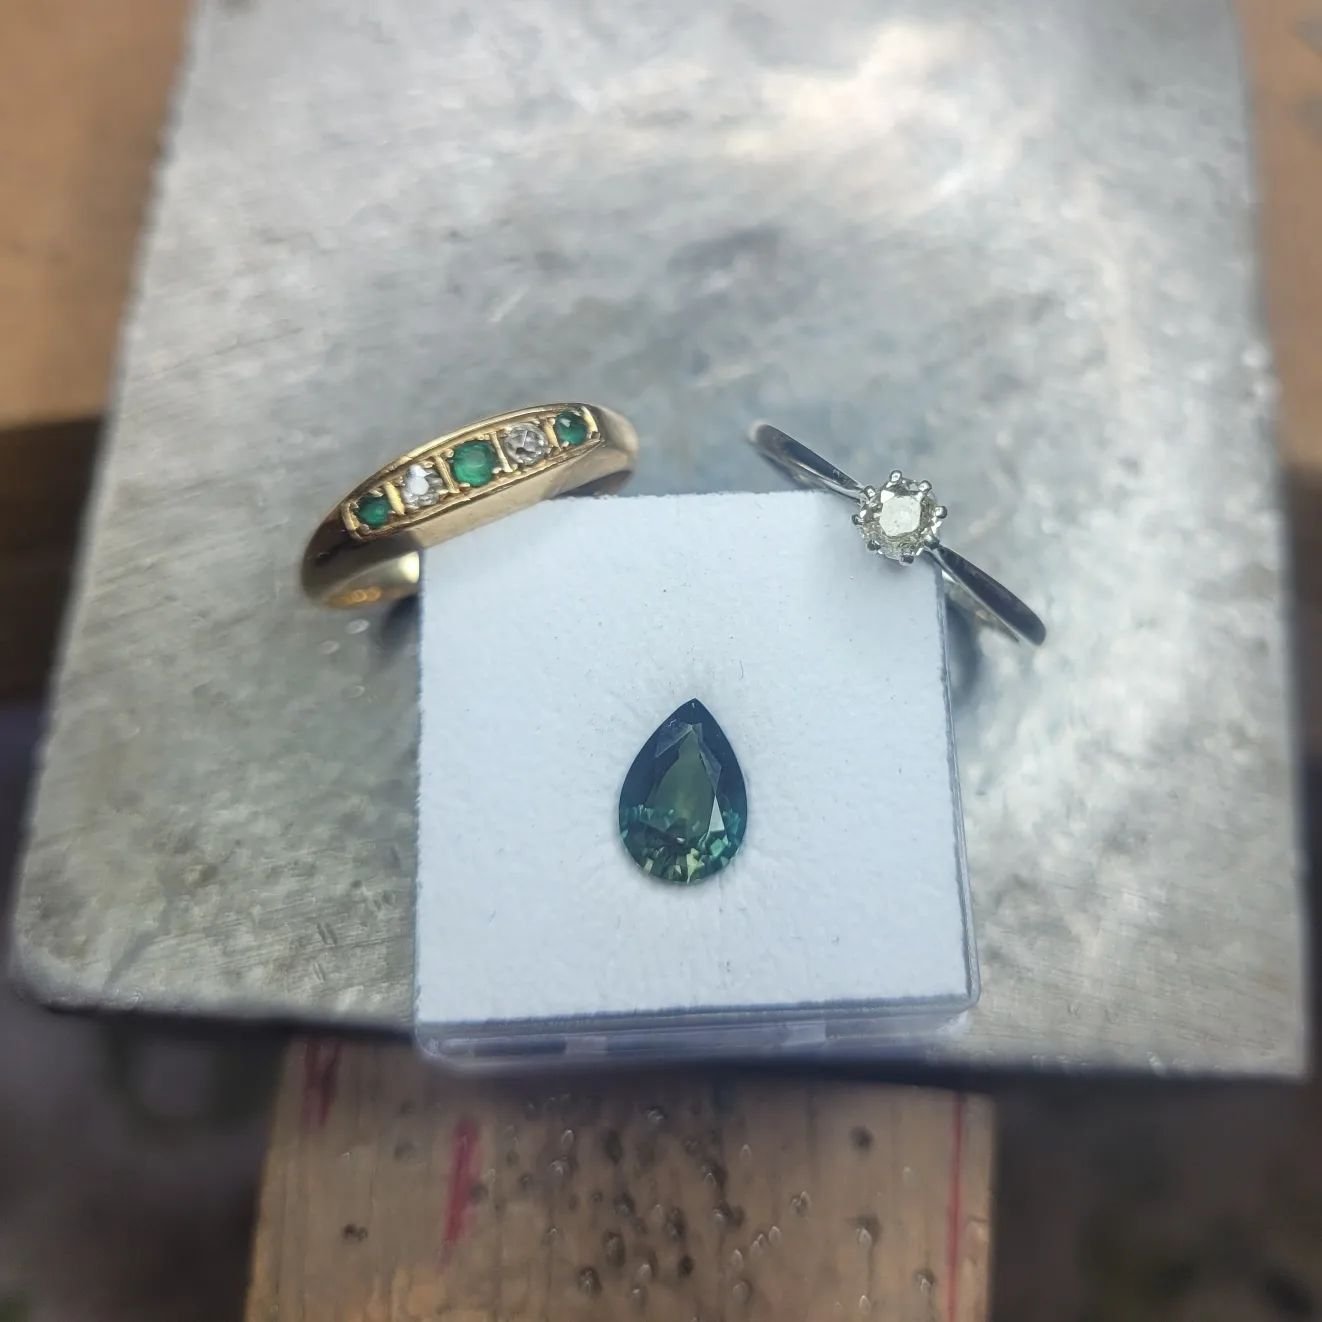 BESPOKE
One of my favourite parts of being a jeweller is remodelling and recycling special pieces into something that can be worn again.
On this piece we chose a gorgeous green sapphire with colours of teal to be a centrepiece to join this sentimenta